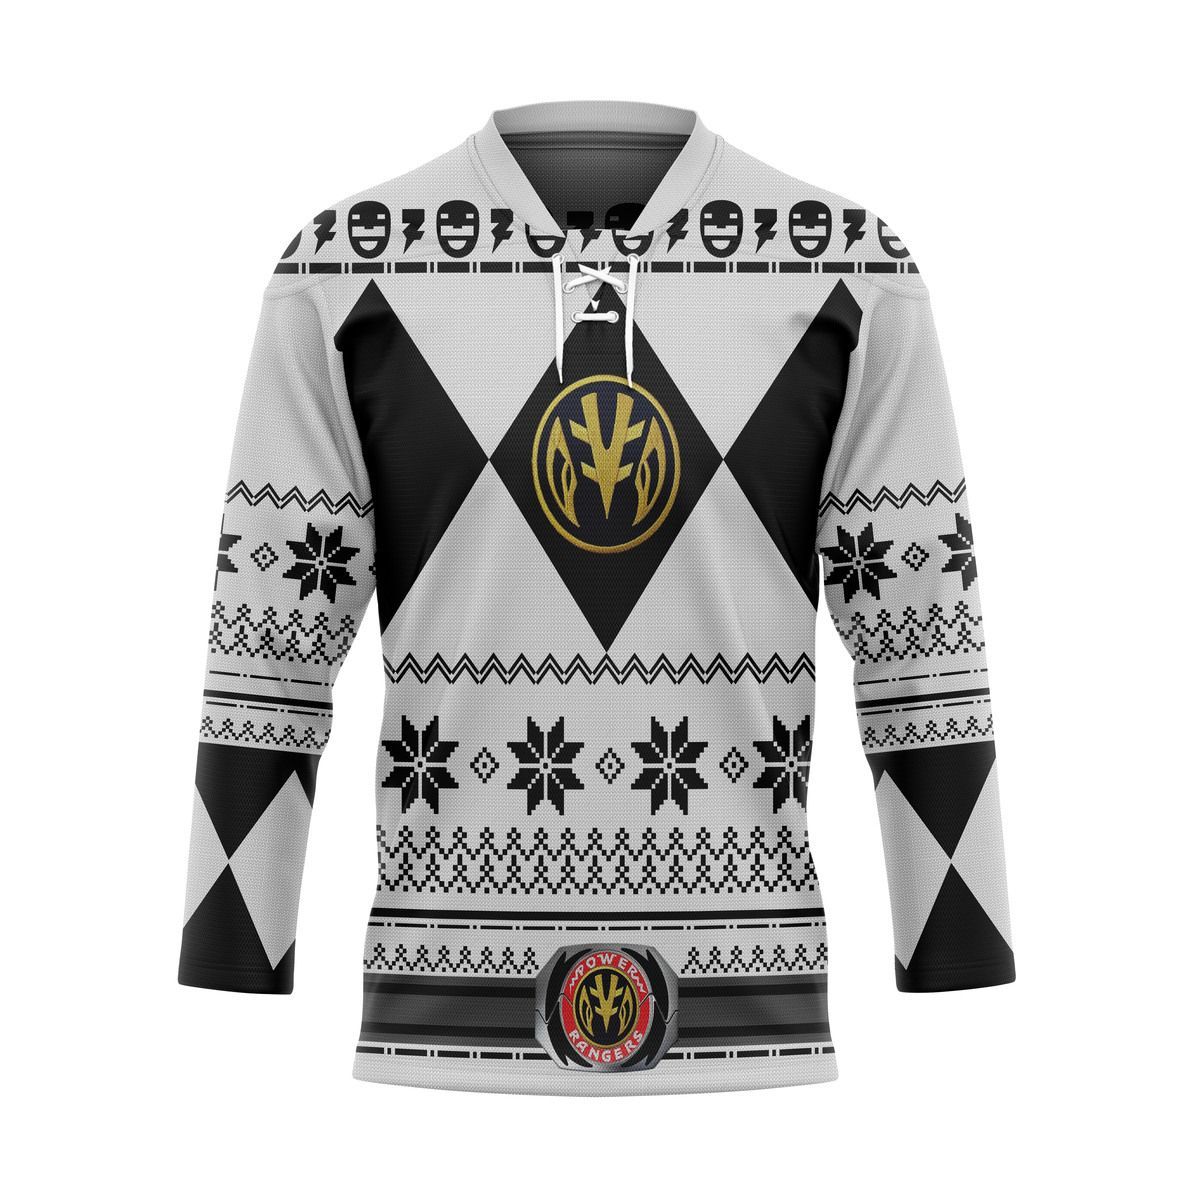 Top hot hockey jersey for NHL fans You can find out more at the bottom of the page! 55